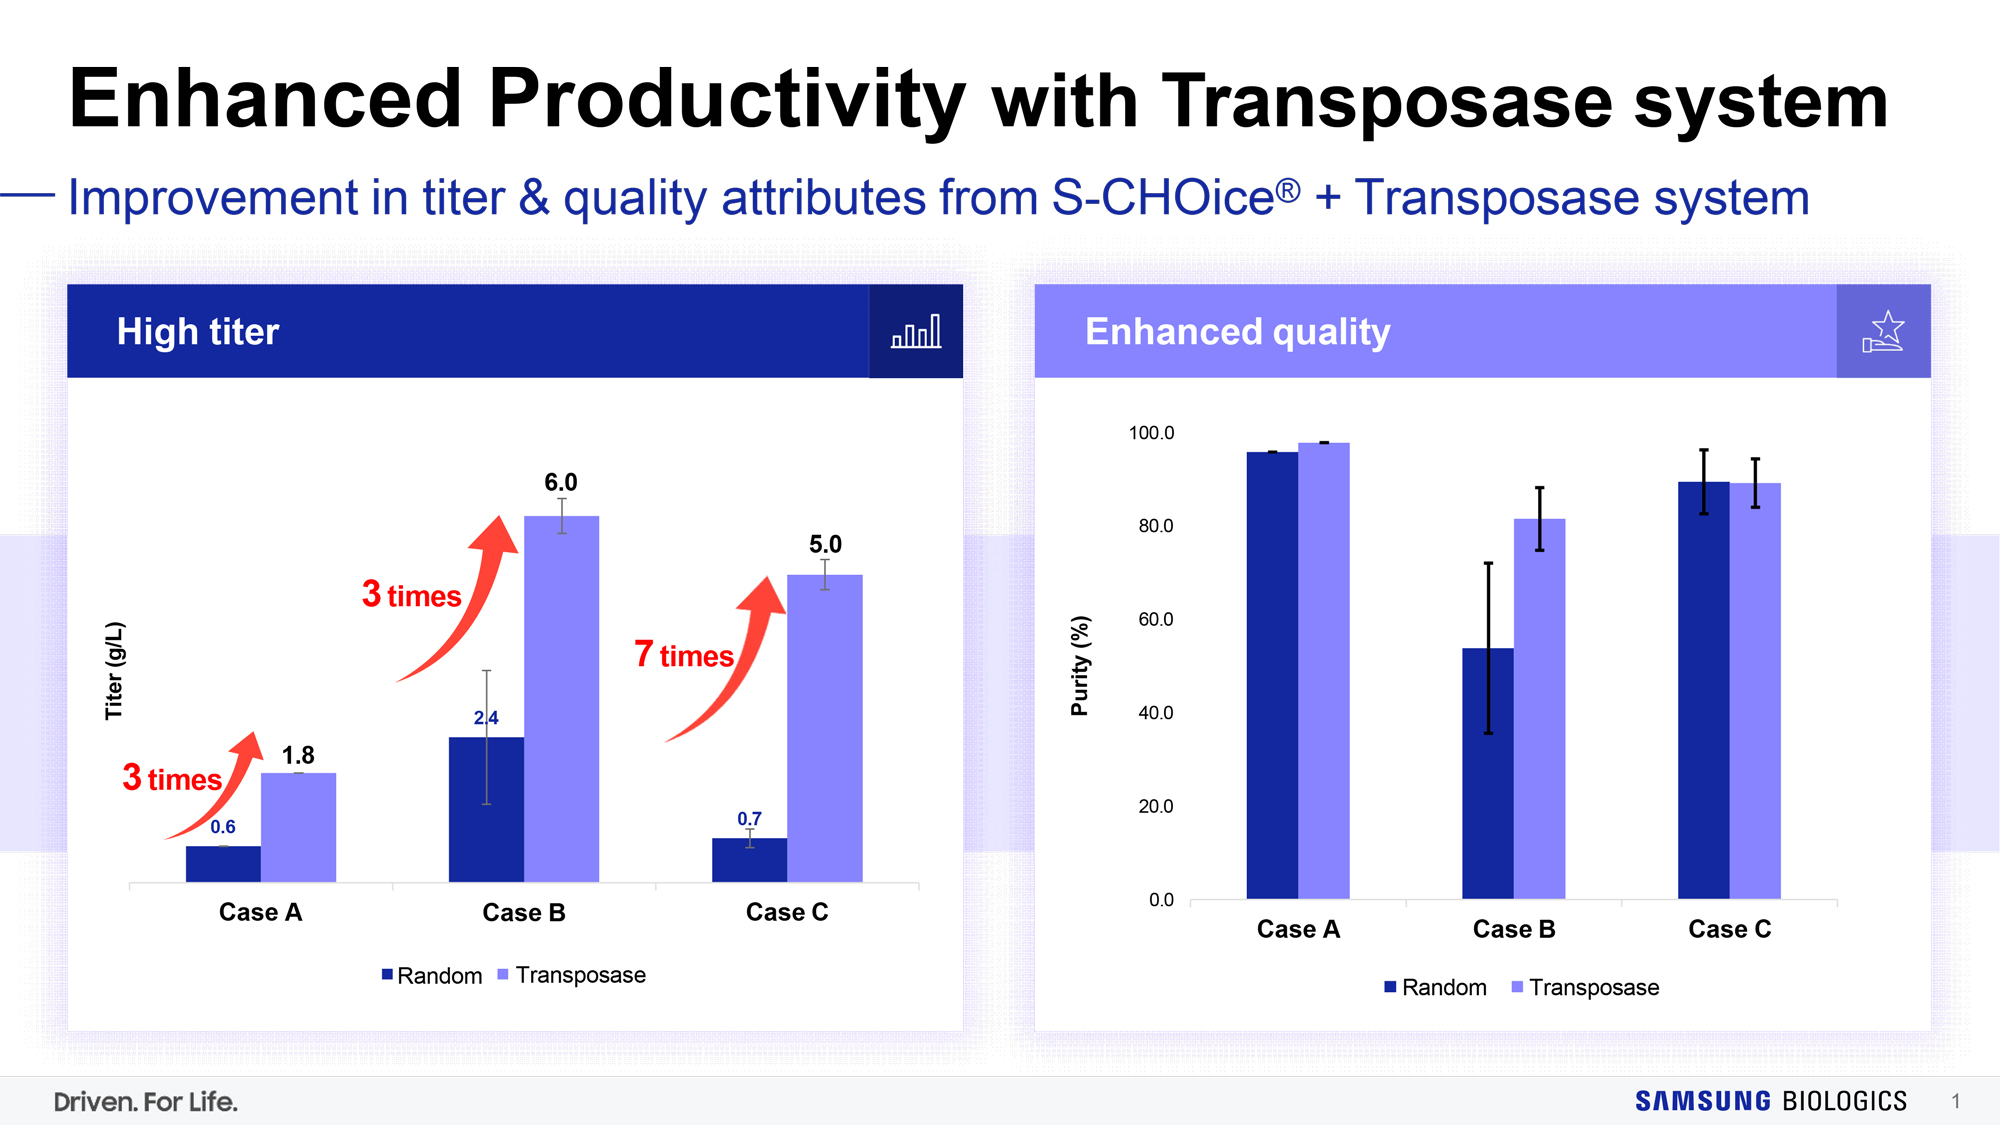 Enhanced Productivity with Transposase system